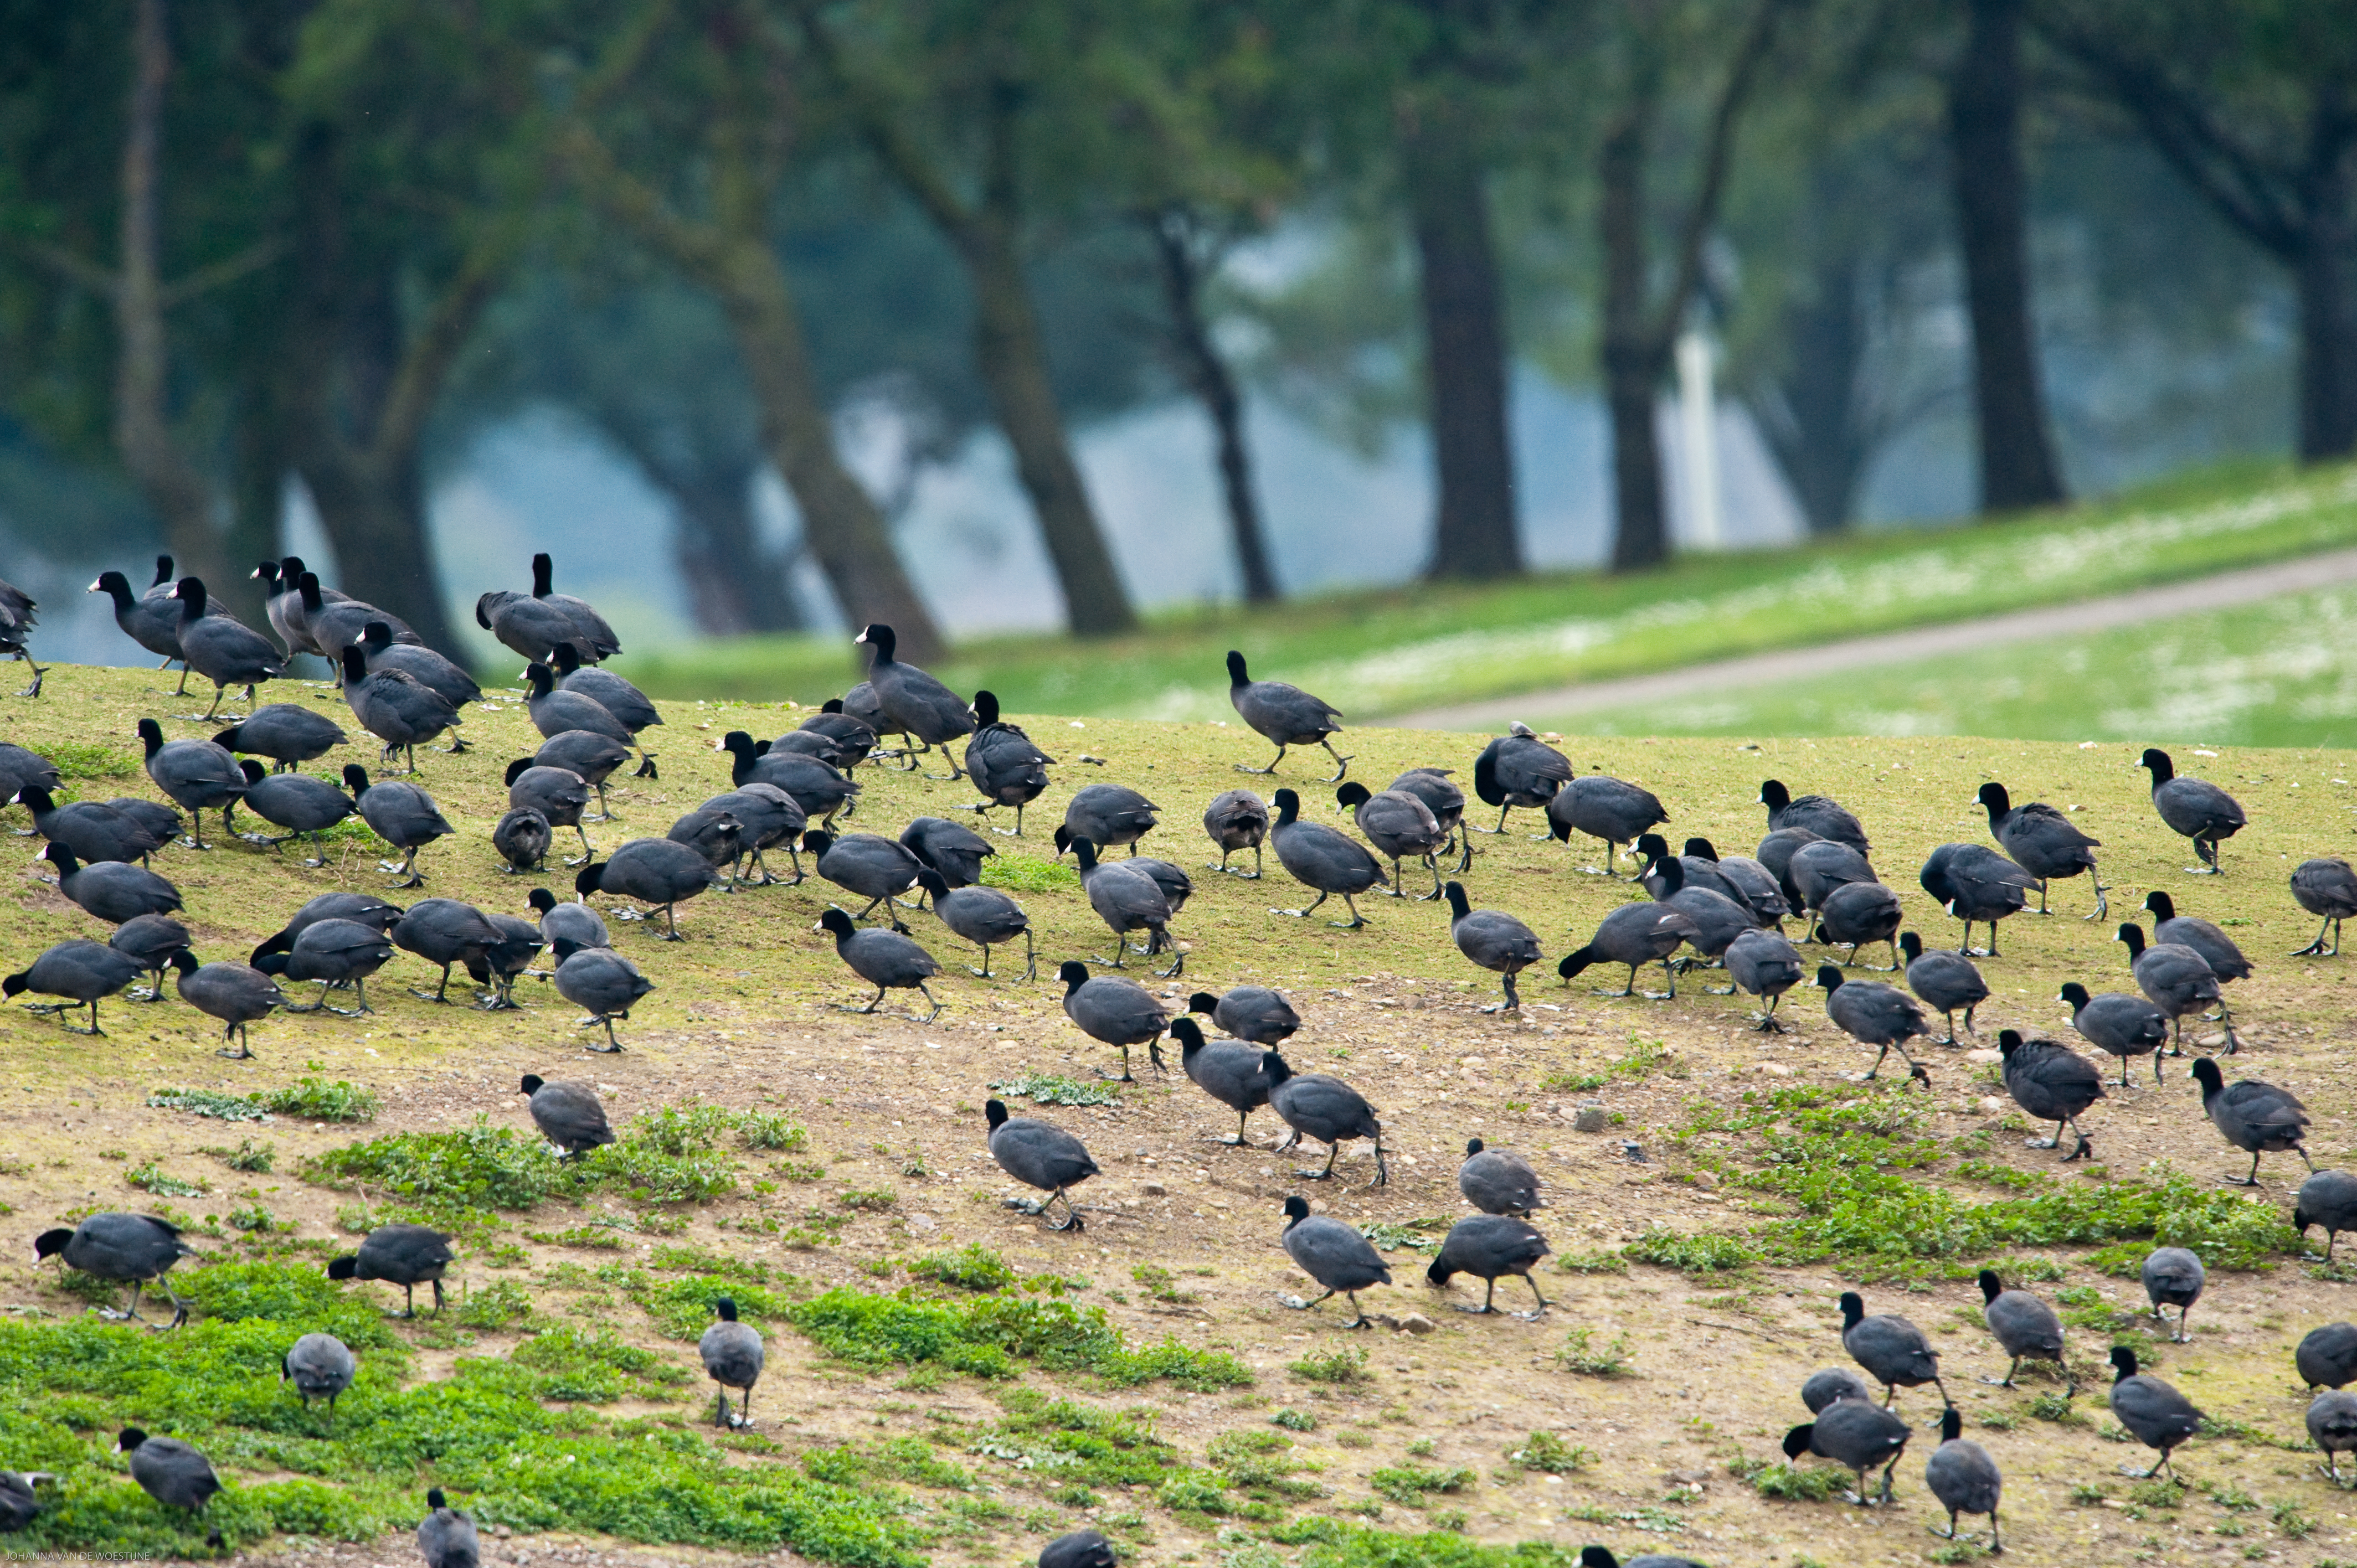 Coots congregating on a golf course from http://www.flickr.com/photos/johannacalifornia/4328453540/